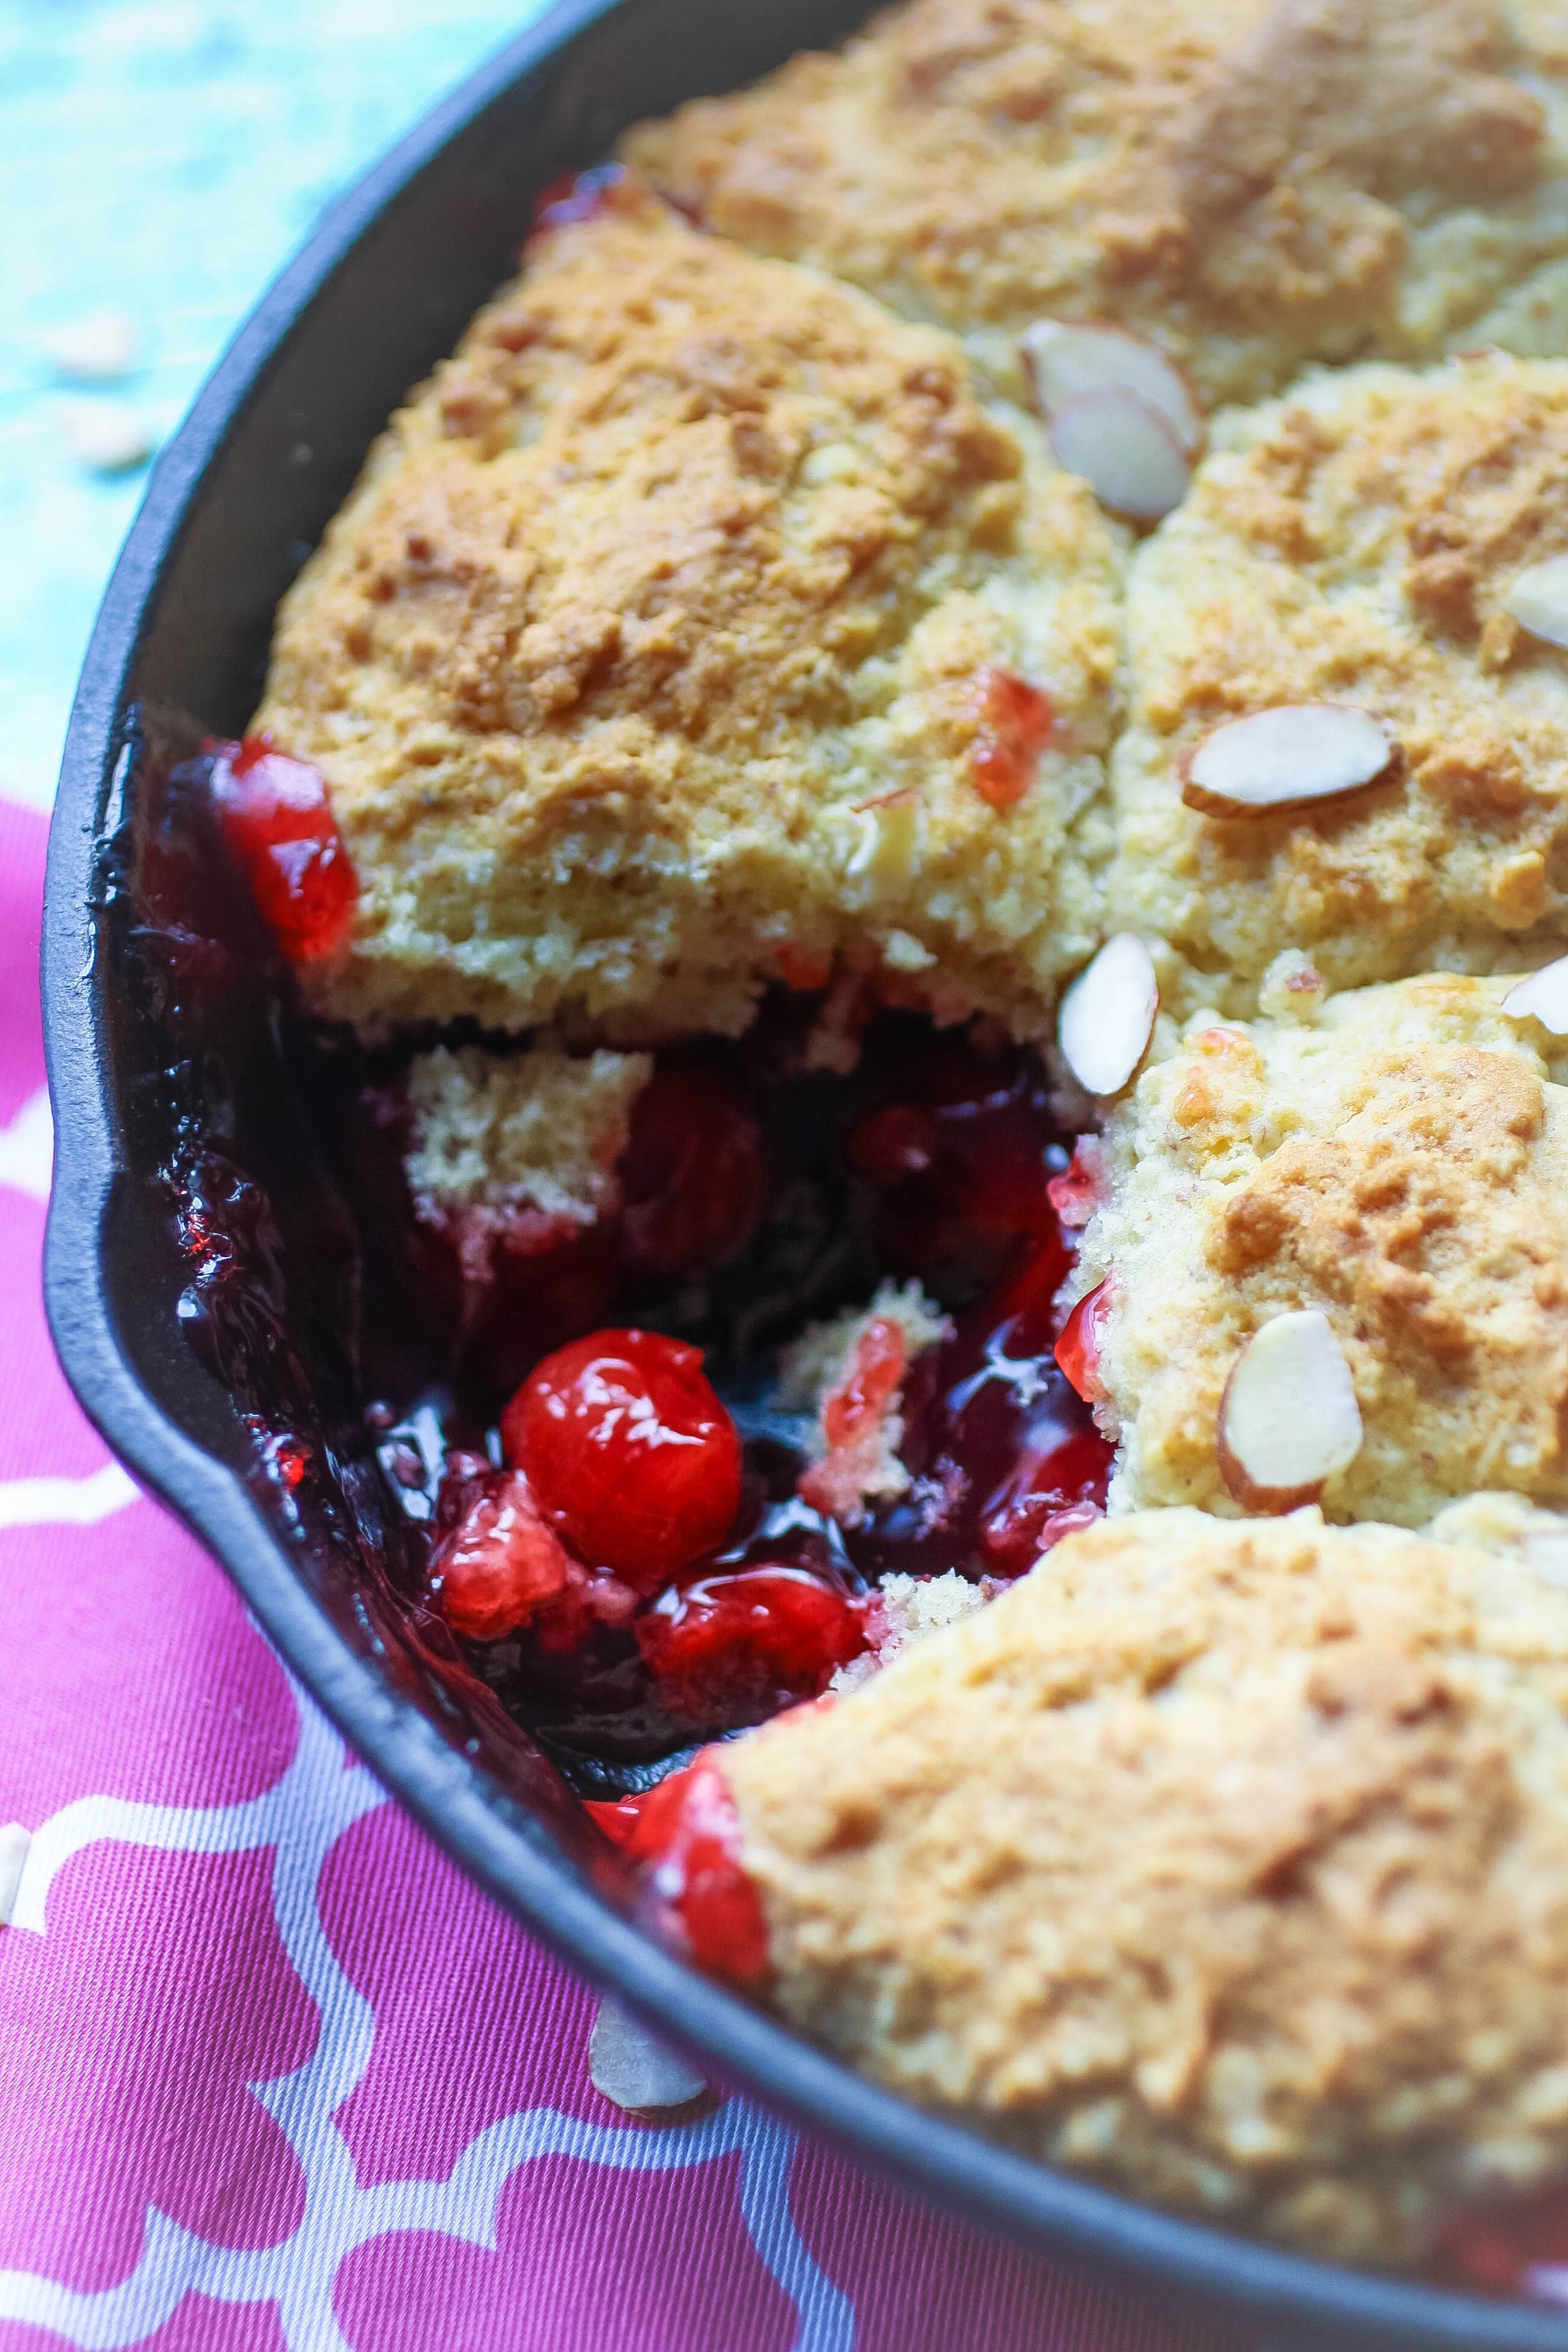 Cherry-Almond Skillet Cobbler makes a fun dessert. You'll enjoy Cherry-Almond Skillet Cobbler as a treat anytime.